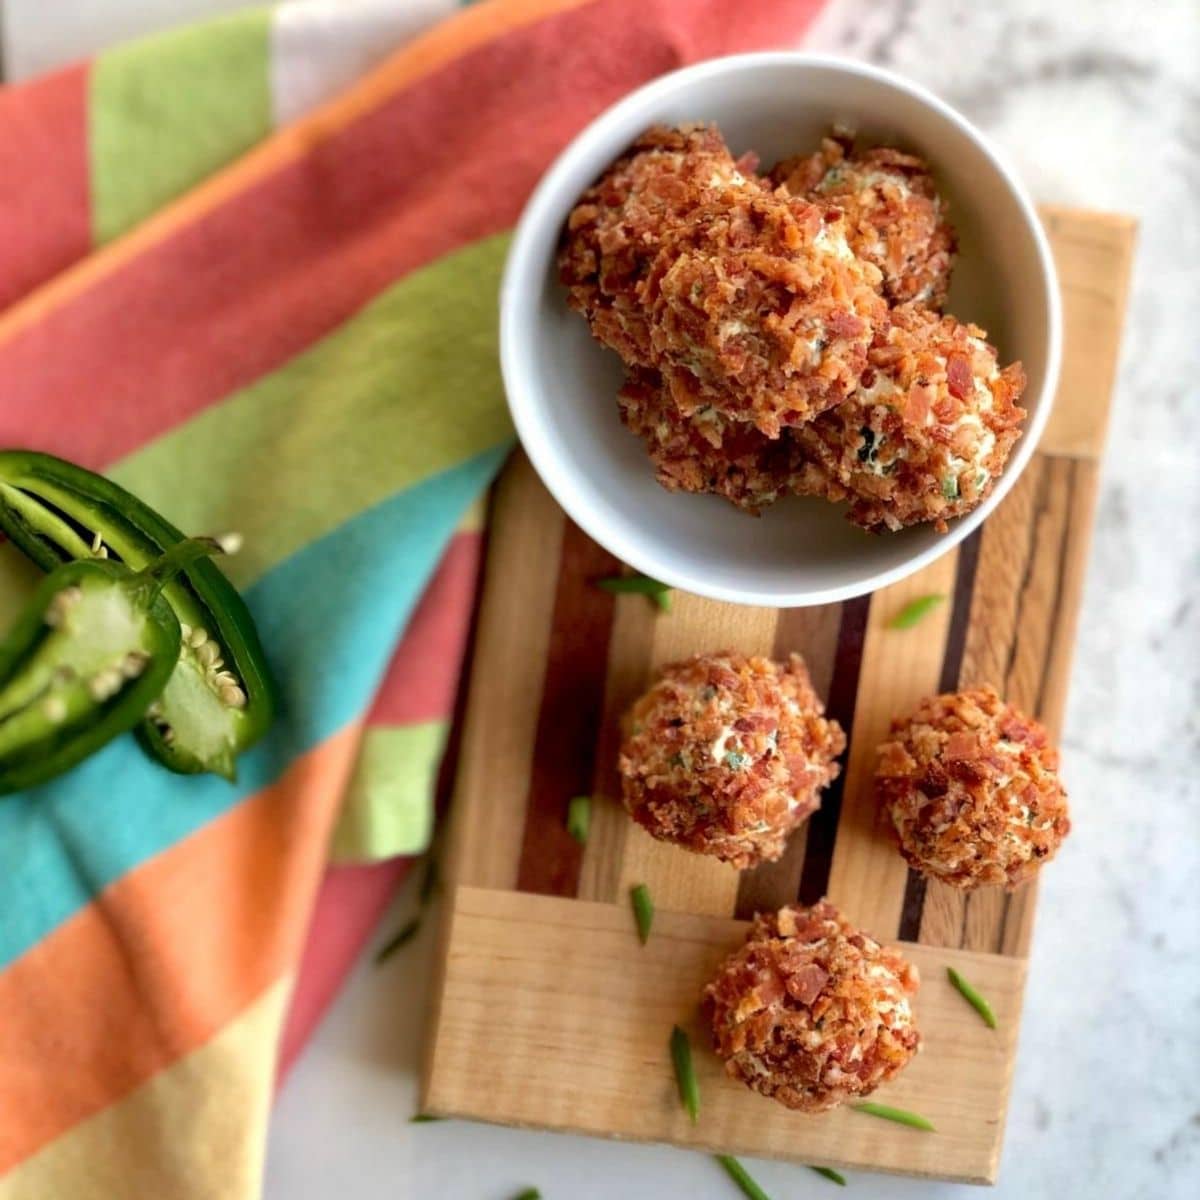 Served jalapeno cheese balls ready to be eaten.